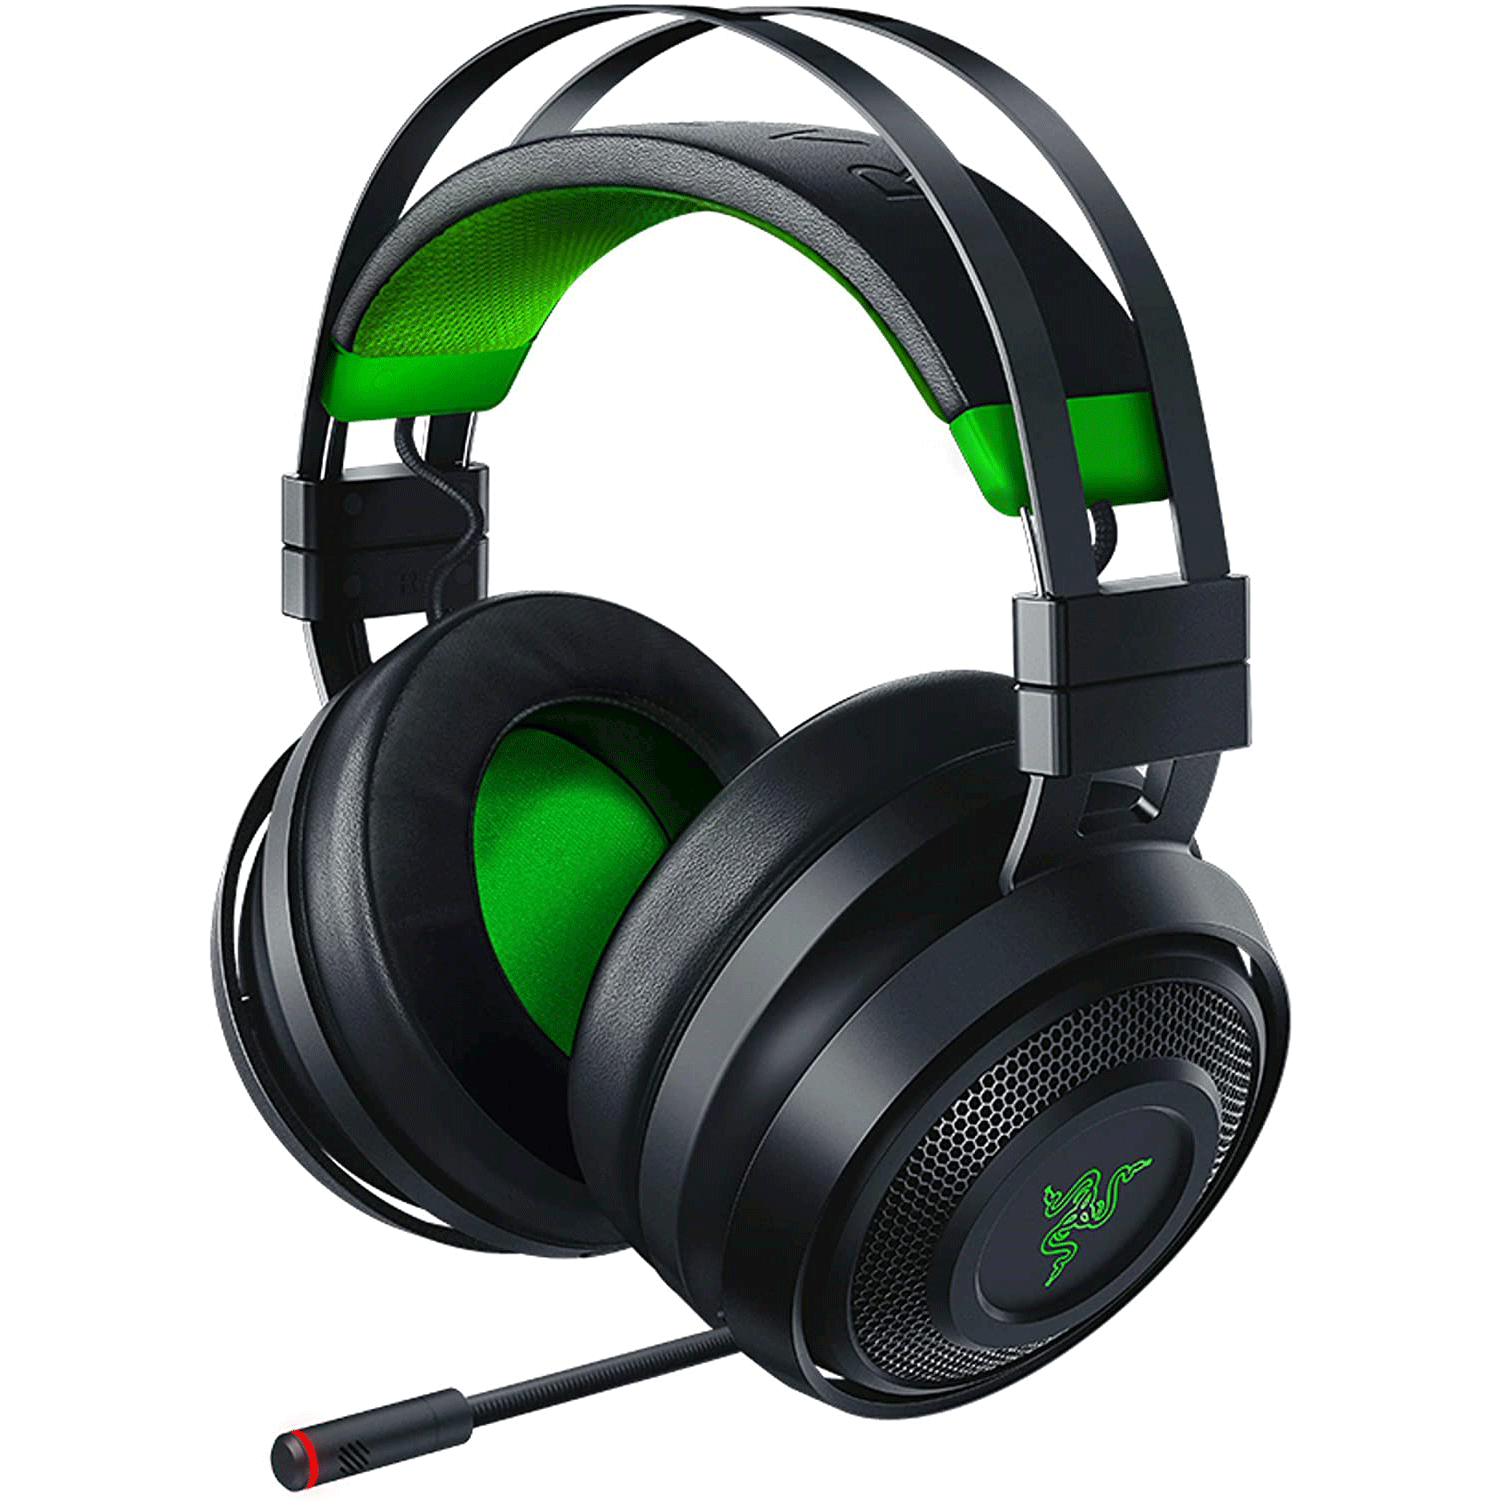 wireless headset for xbox series s